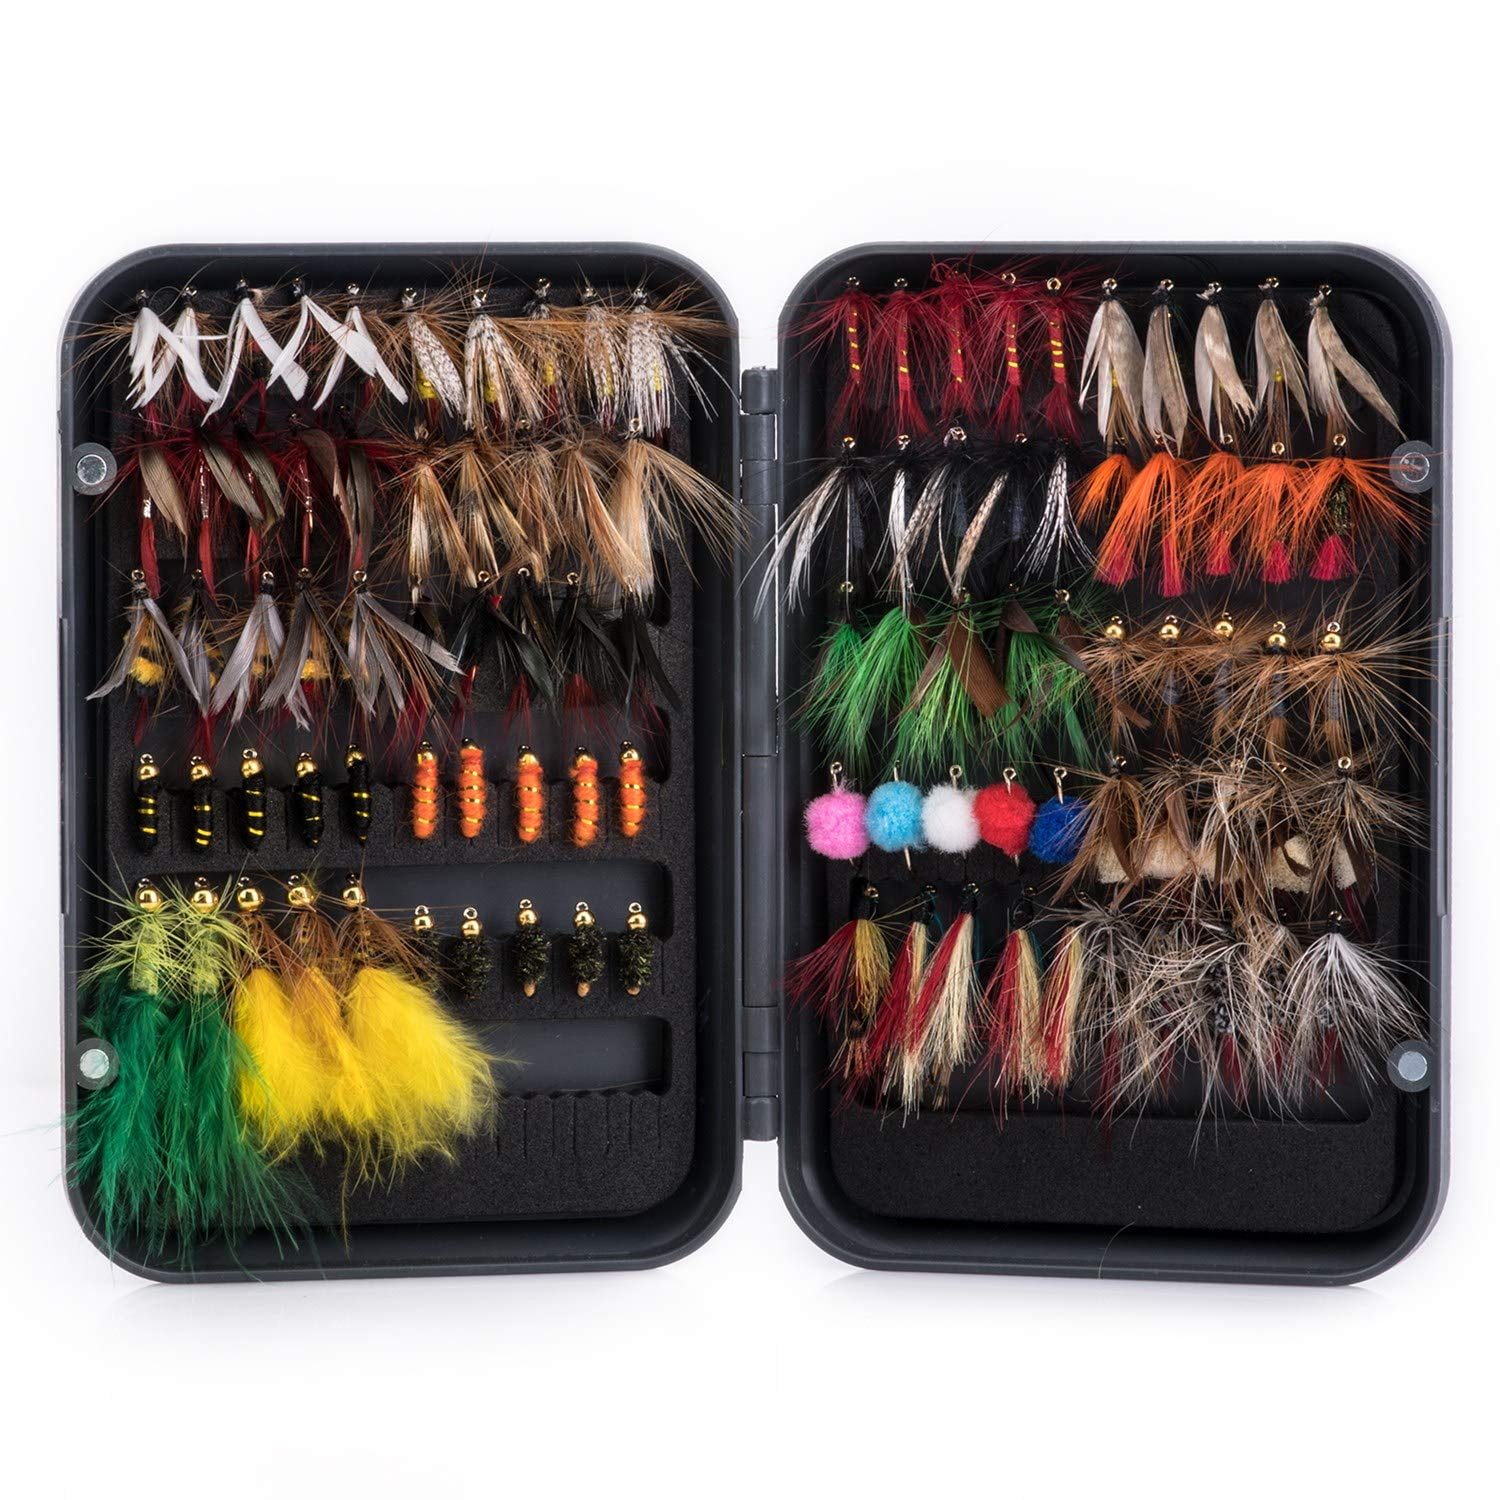  Fly Fishing Flies Kit, 36/78Pcs Fly Fishing Lures, Fly Fishing  Dry Flies Wet Flies Assortment Kit with Waterproof Fly Box for Trout Fishing  : Sports & Outdoors